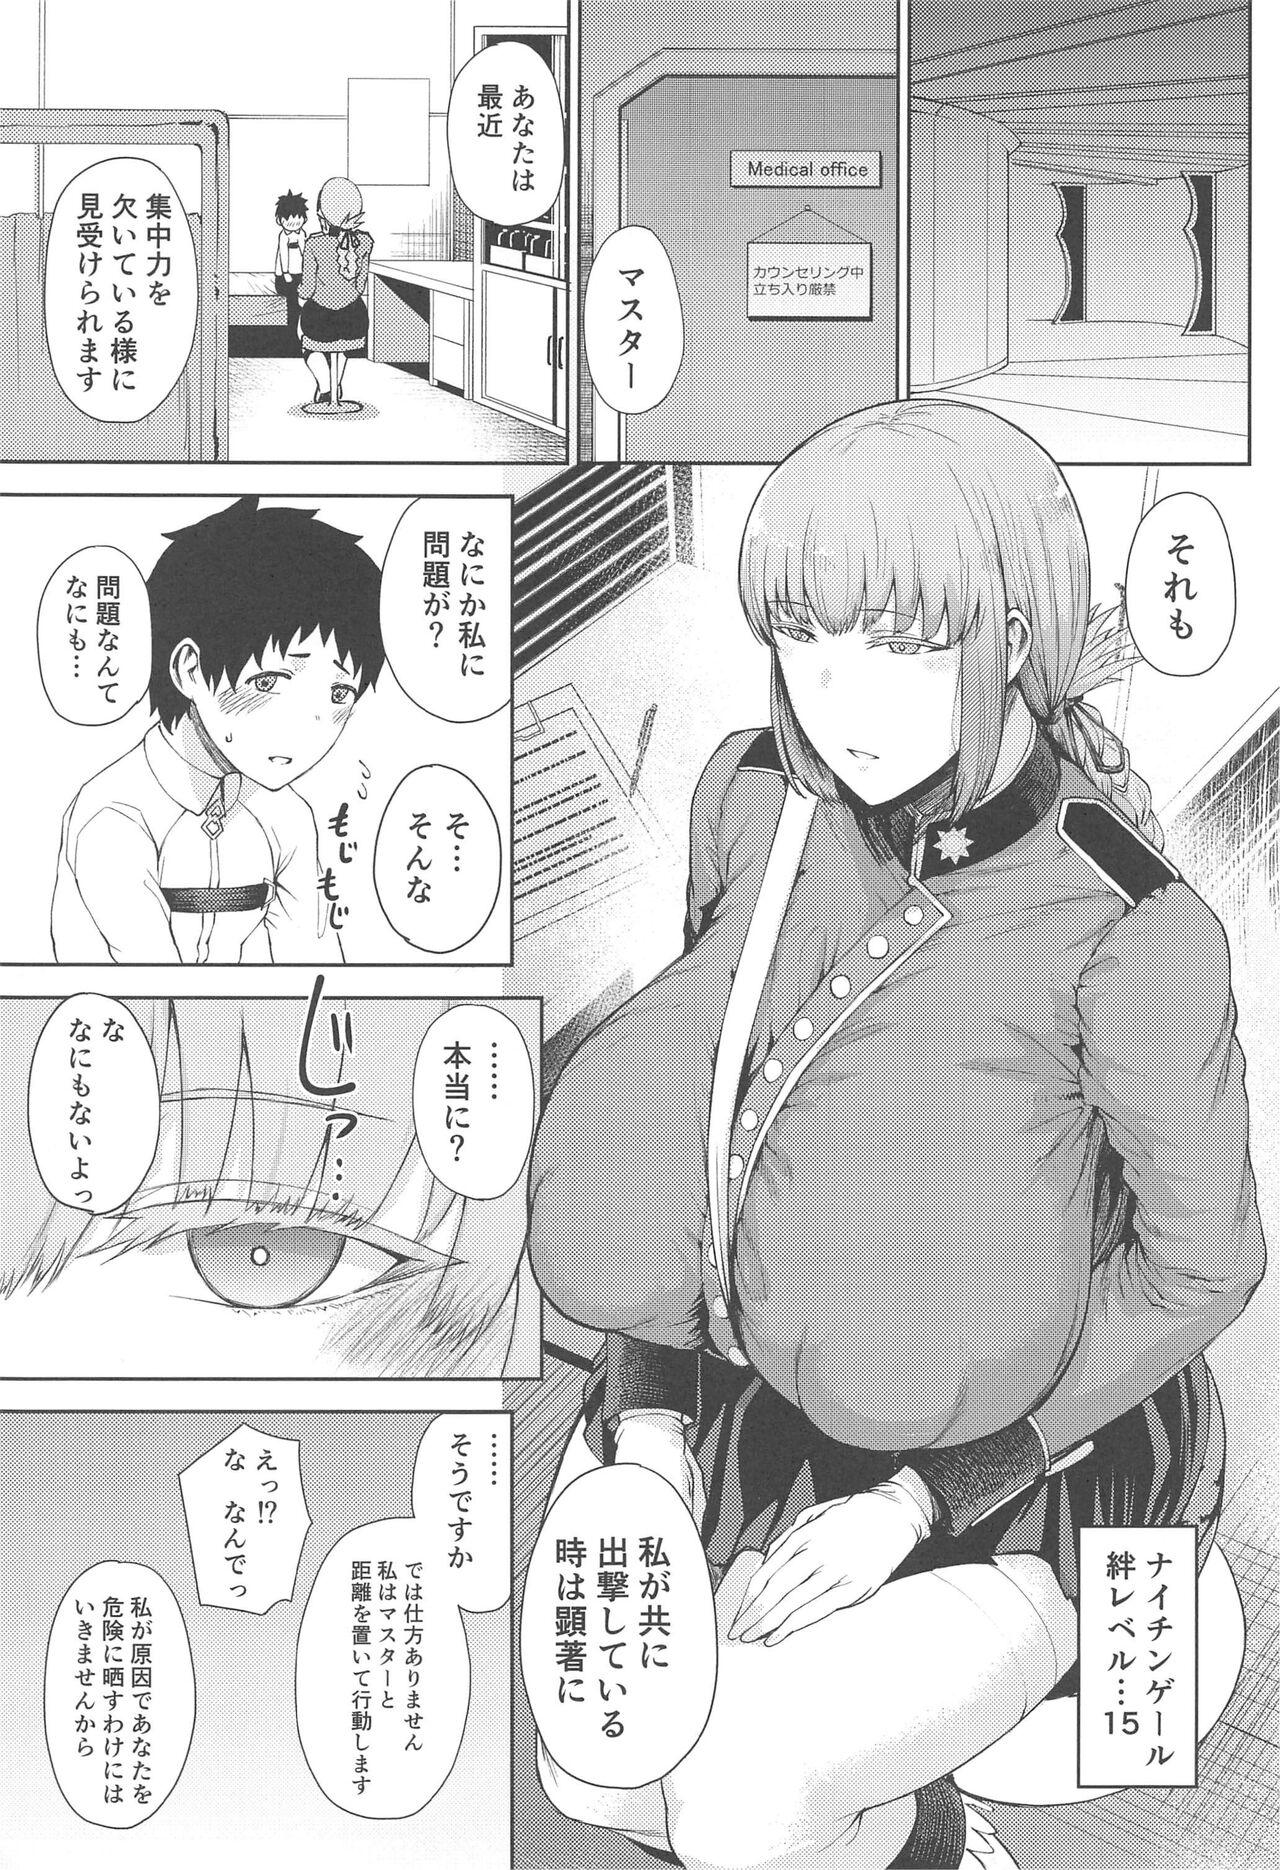 Doctor Sex Chiryou desu - Fate grand order Hand Job - Page 2